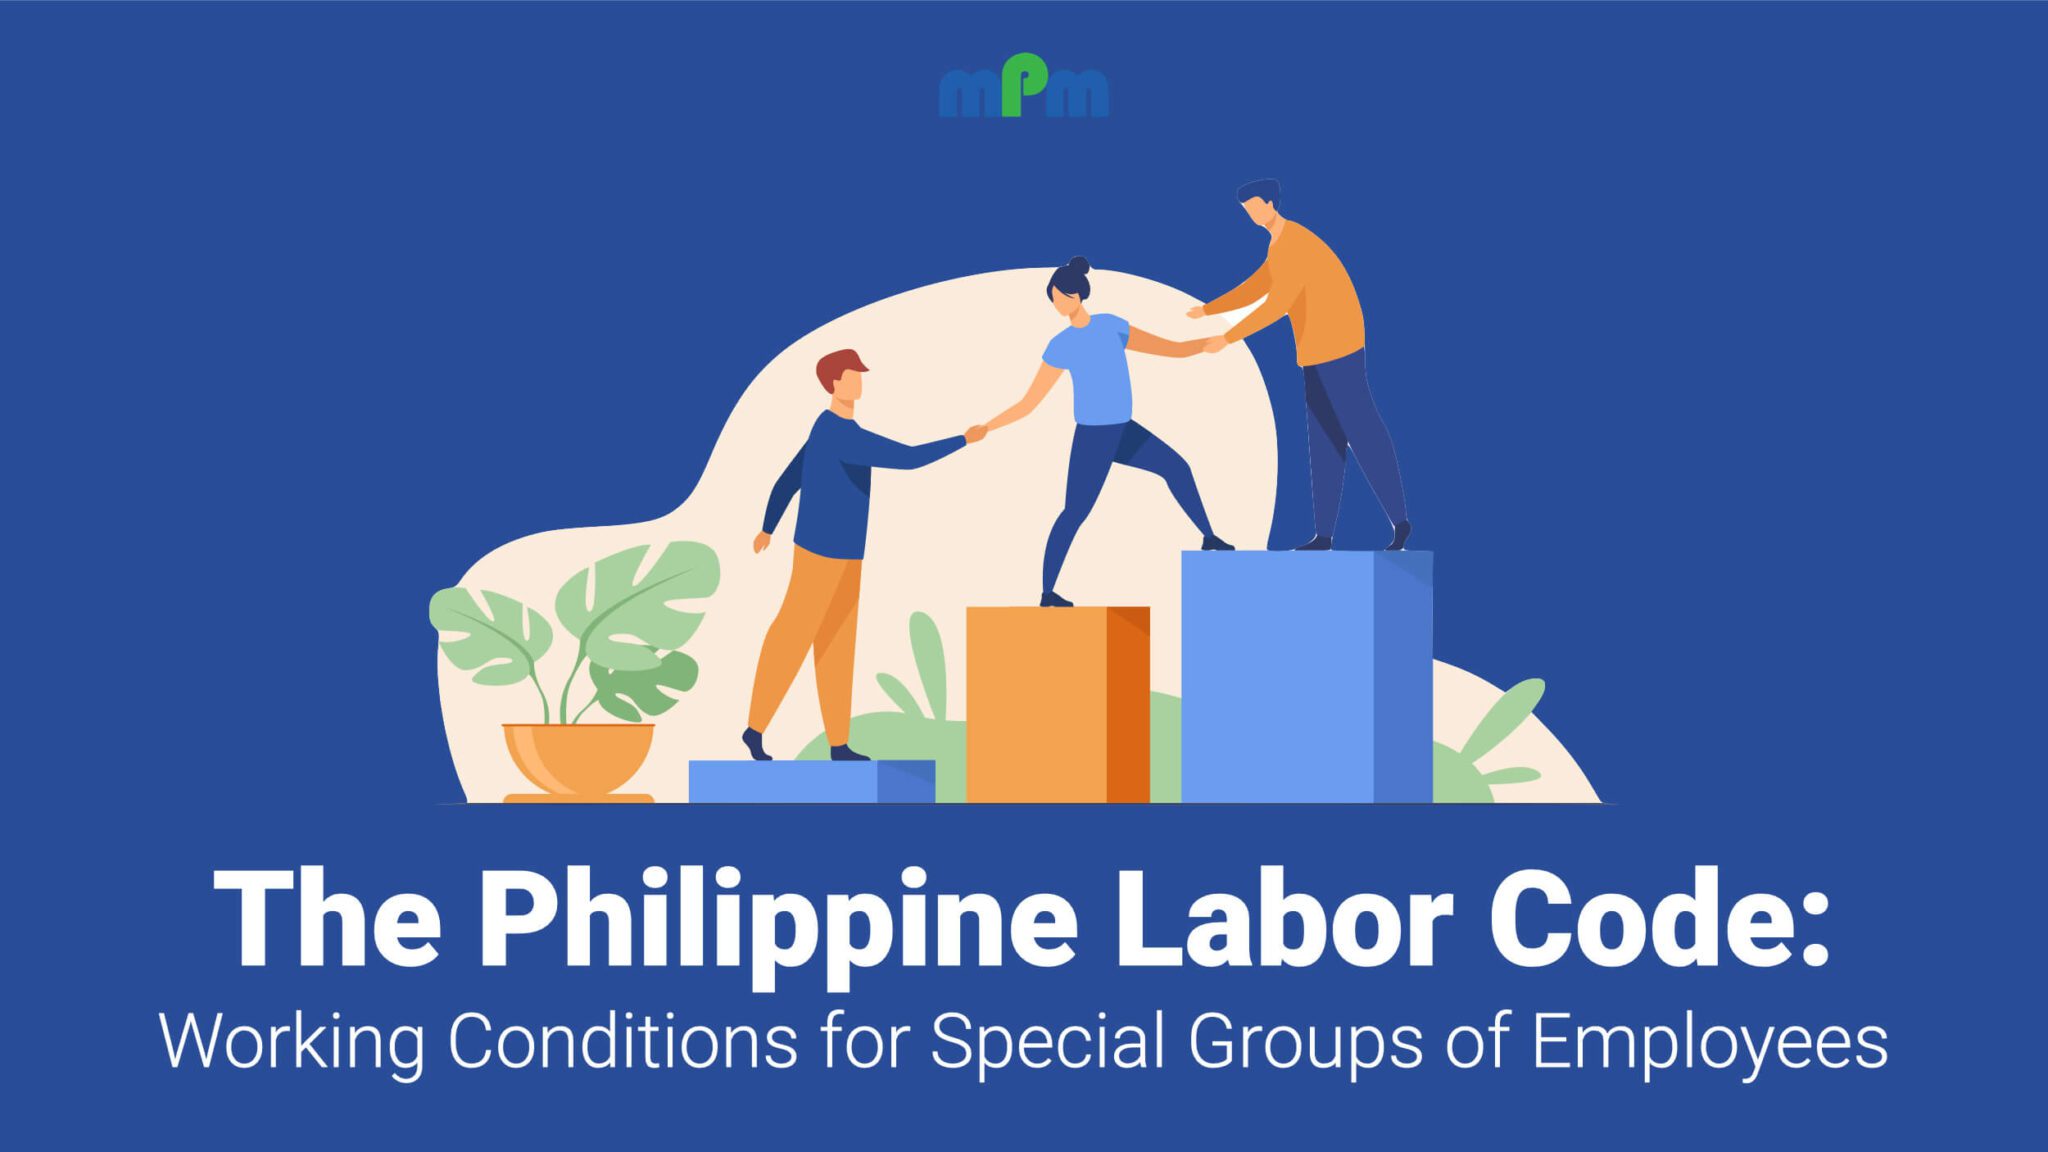 Maternity Leave and Other Mandates from the Philippine Labor Code